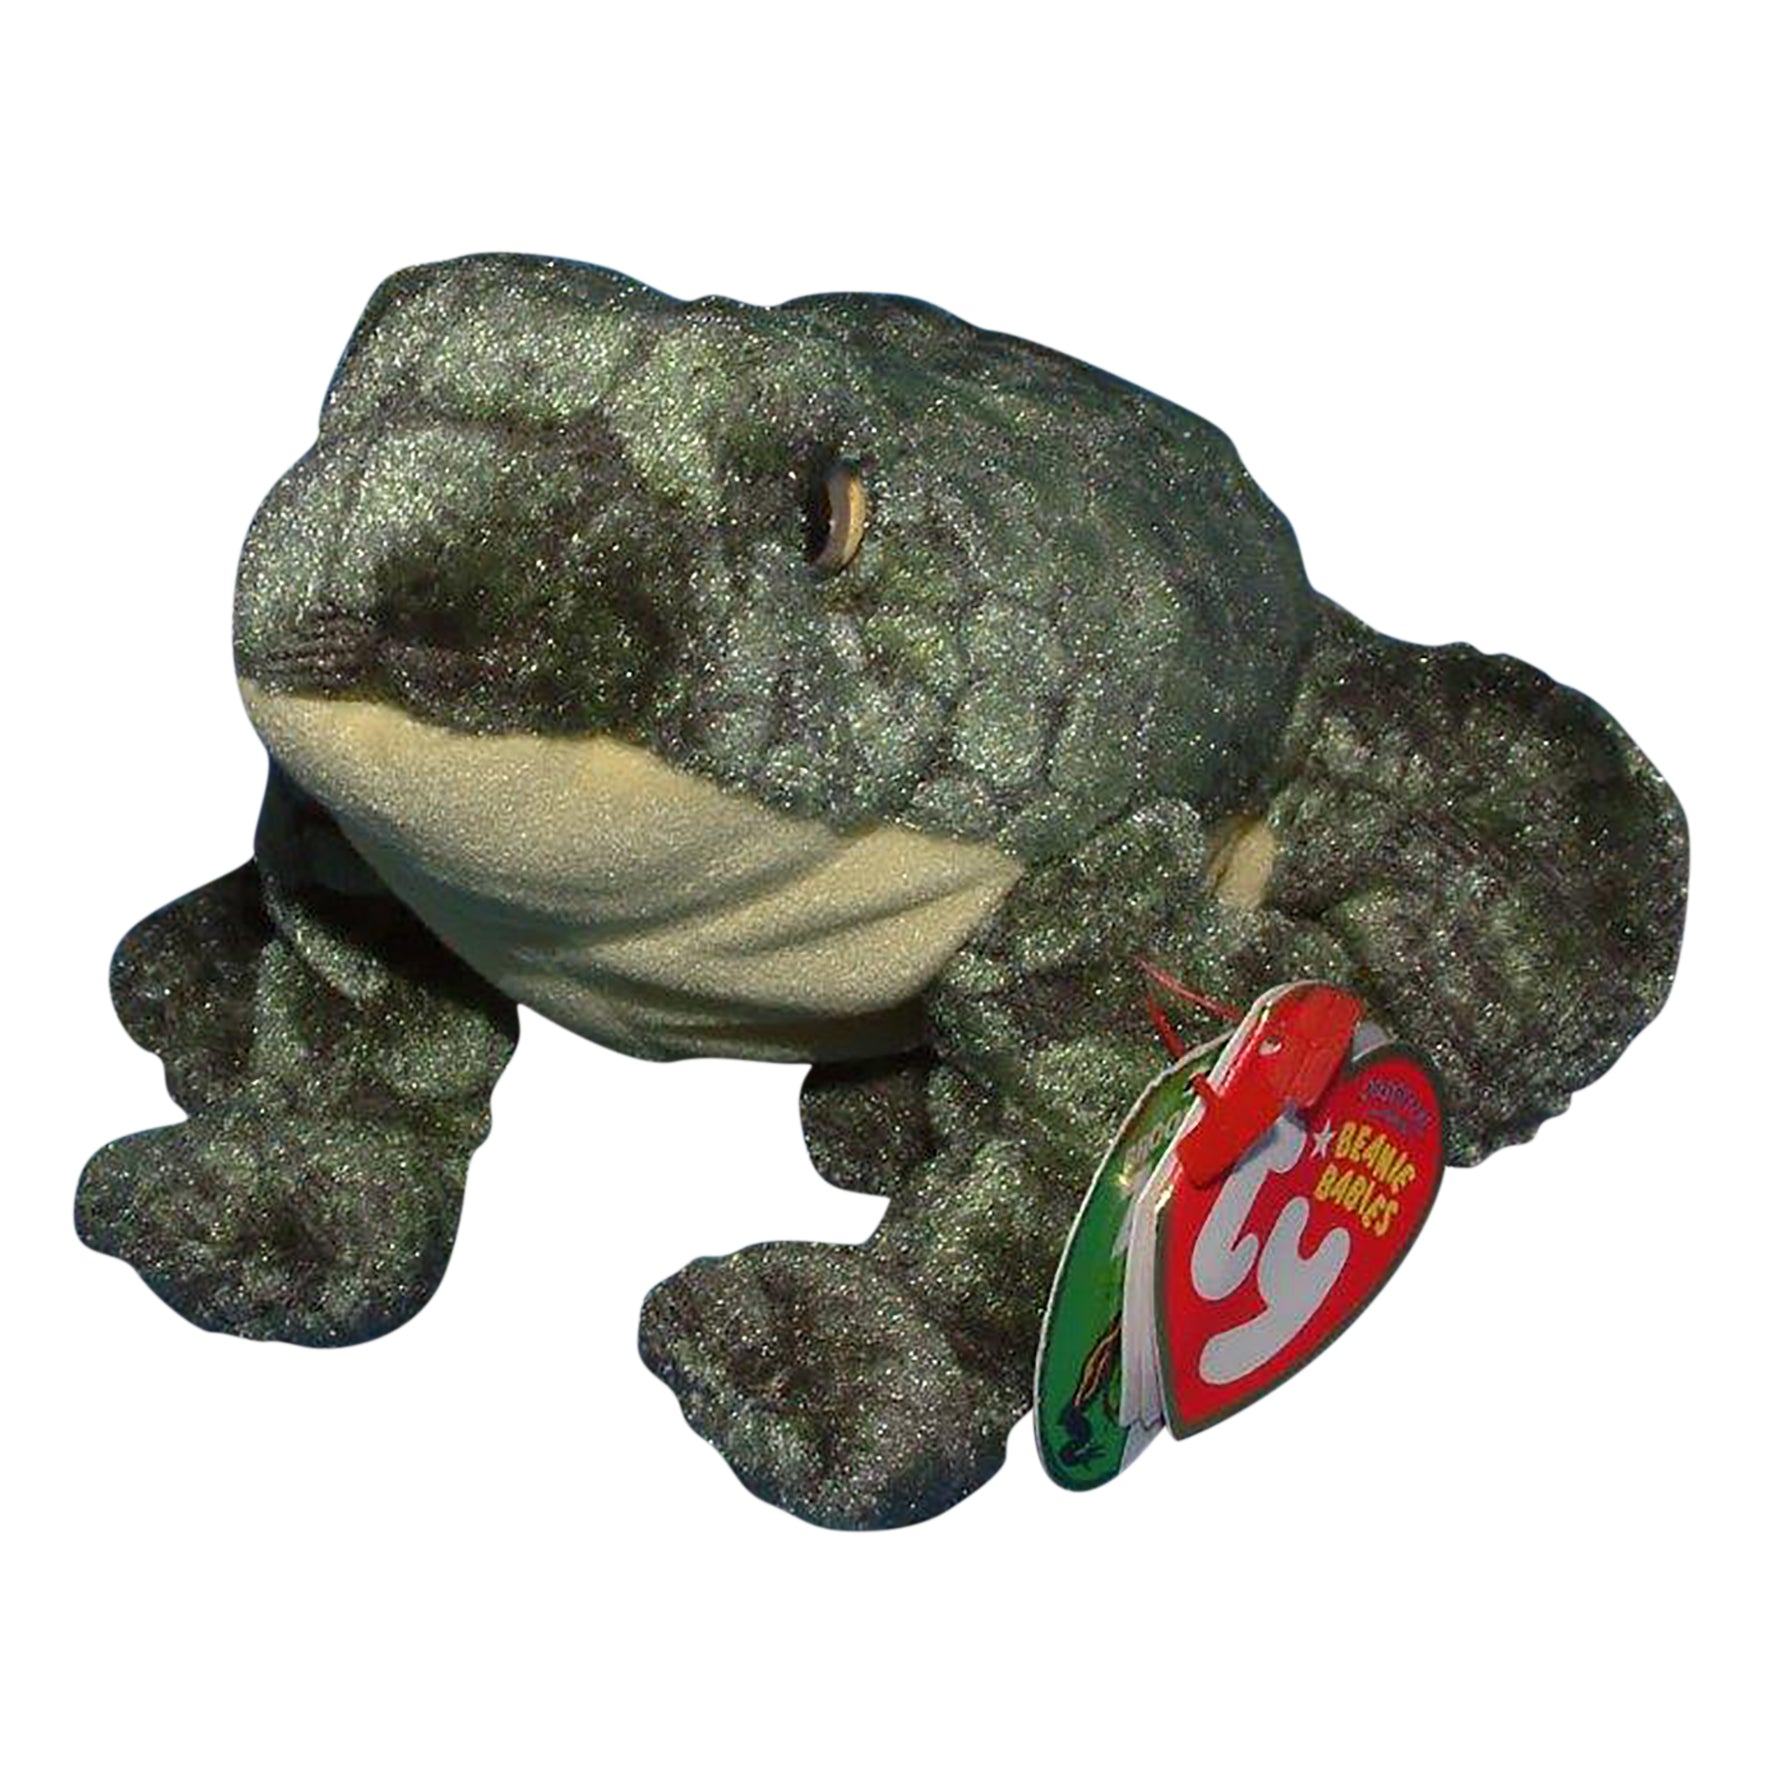 TY Beanie Baby Smoochy the Frog Collectible Plush 1997 - Chickenmash Farm